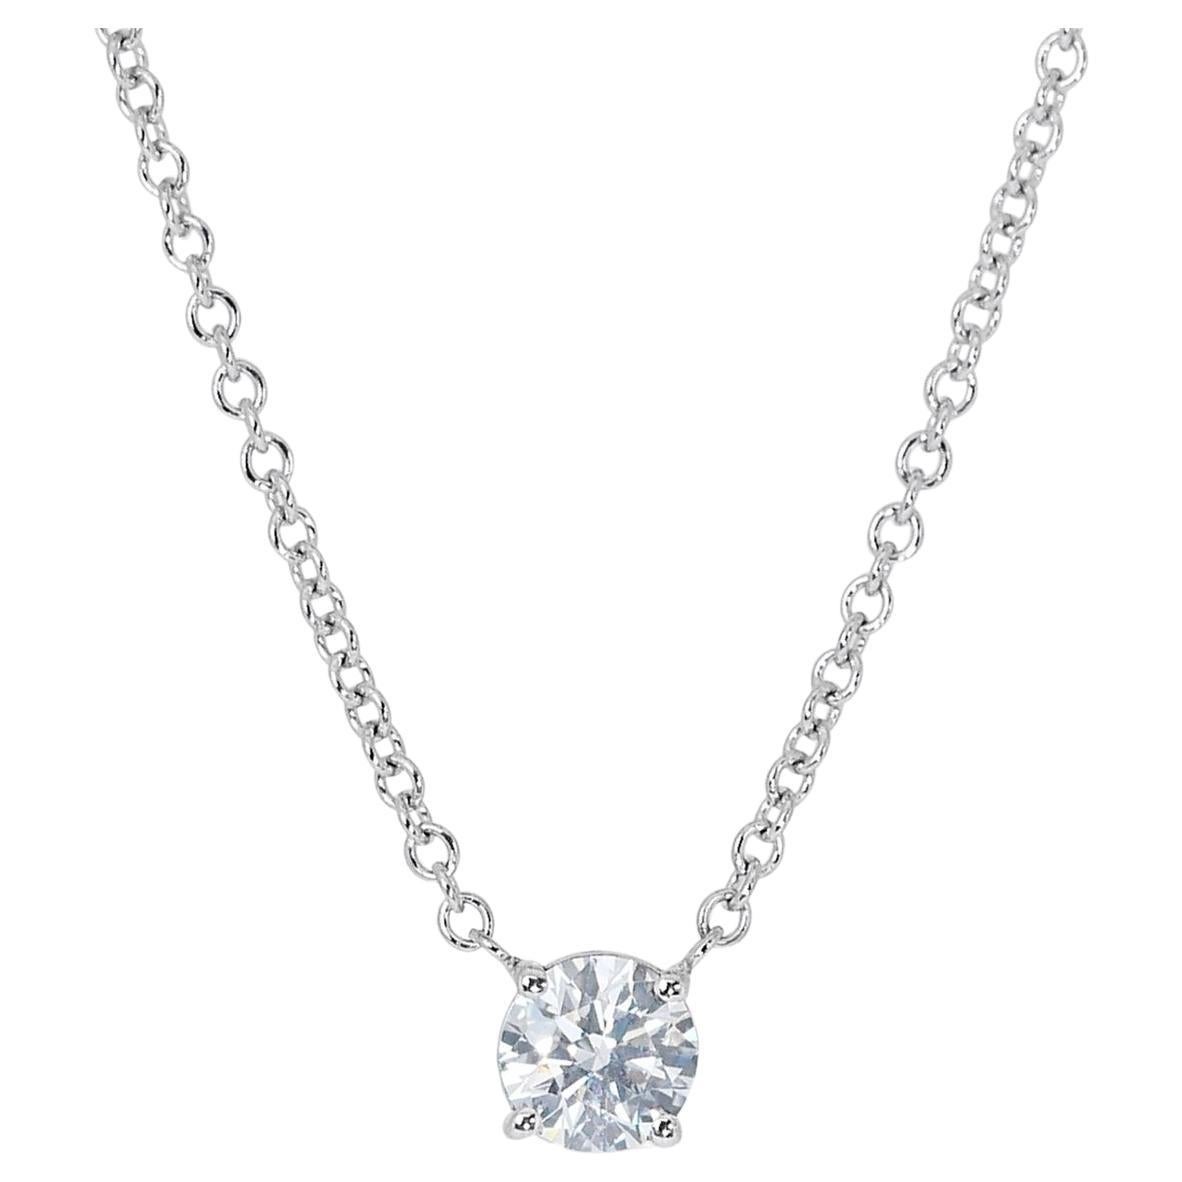 Alluring 18K White Gold Diamond Necklace w/ Pendant w/ 0.32 ct - GIA Certified For Sale